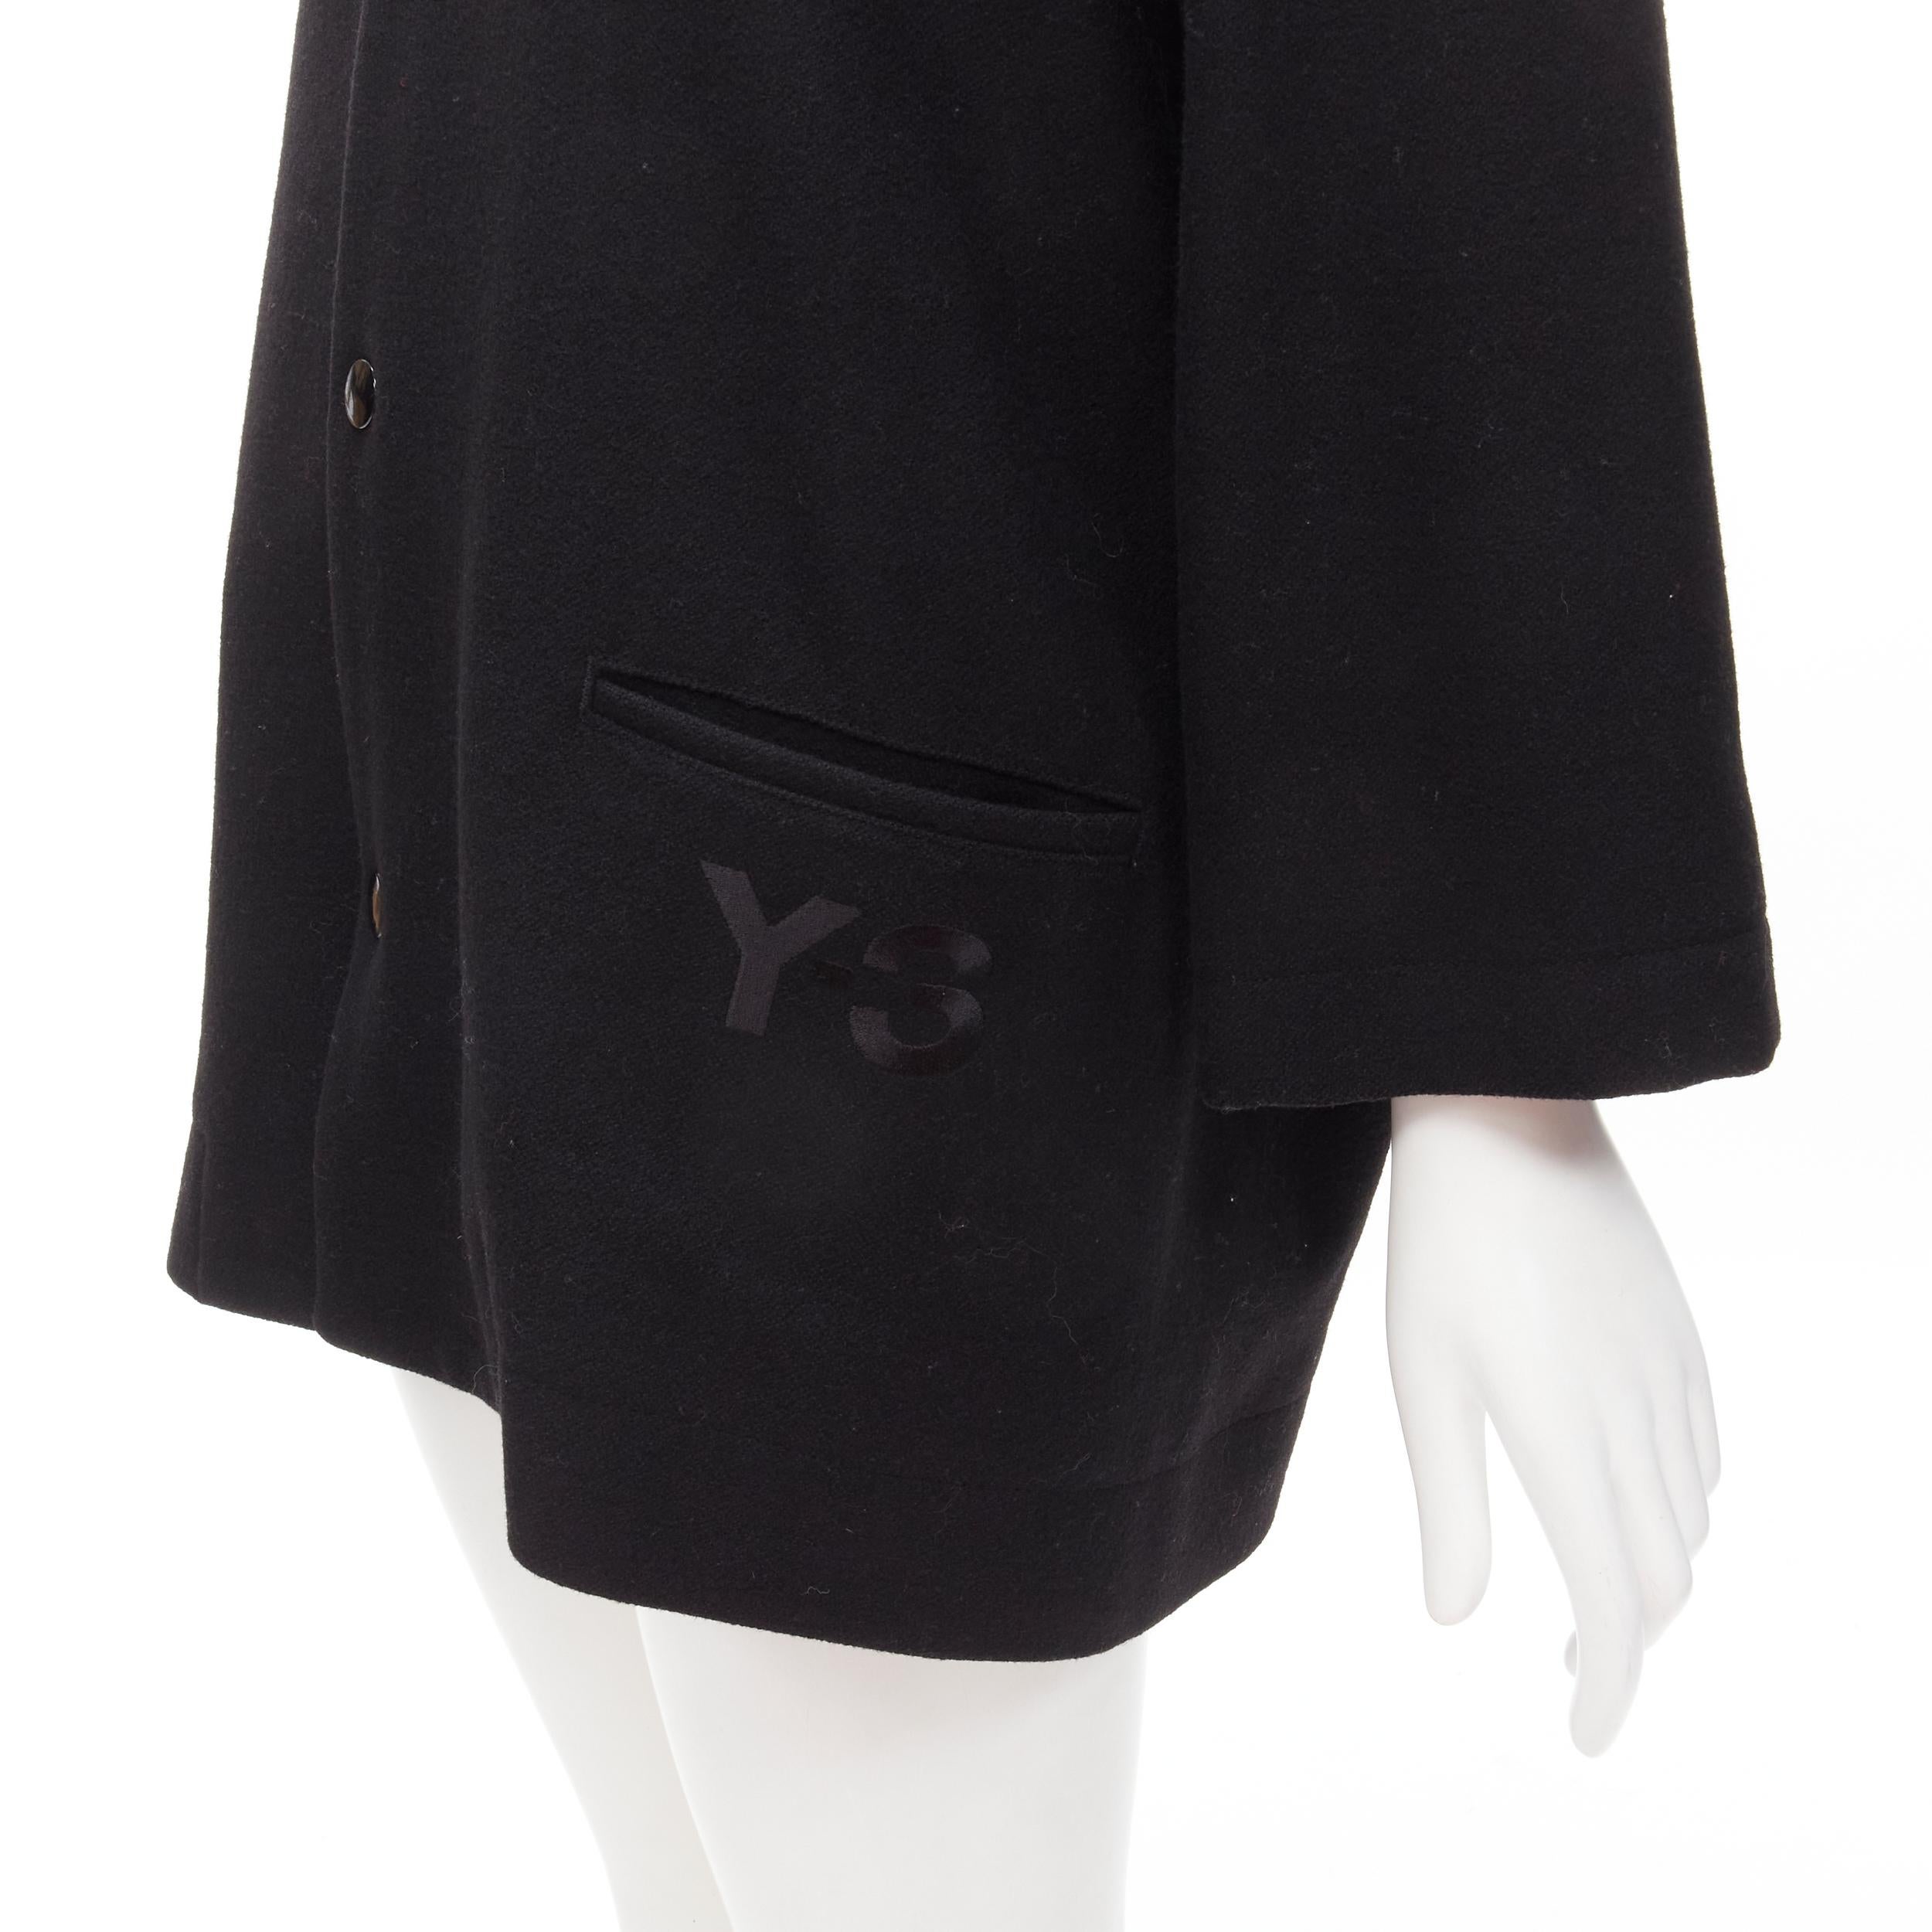 Y3 YOHJI YAMAMOTO ADIDAS black wool fur lined hood cocoon coat XS
Brand: Y3
Material: Feels like wool
Color: Black
Pattern: Solid
Closure: Snap Buttons
Extra Detail: Y3 logo embroidery at front pocket. Snap button closure. Fur trim lined hood.